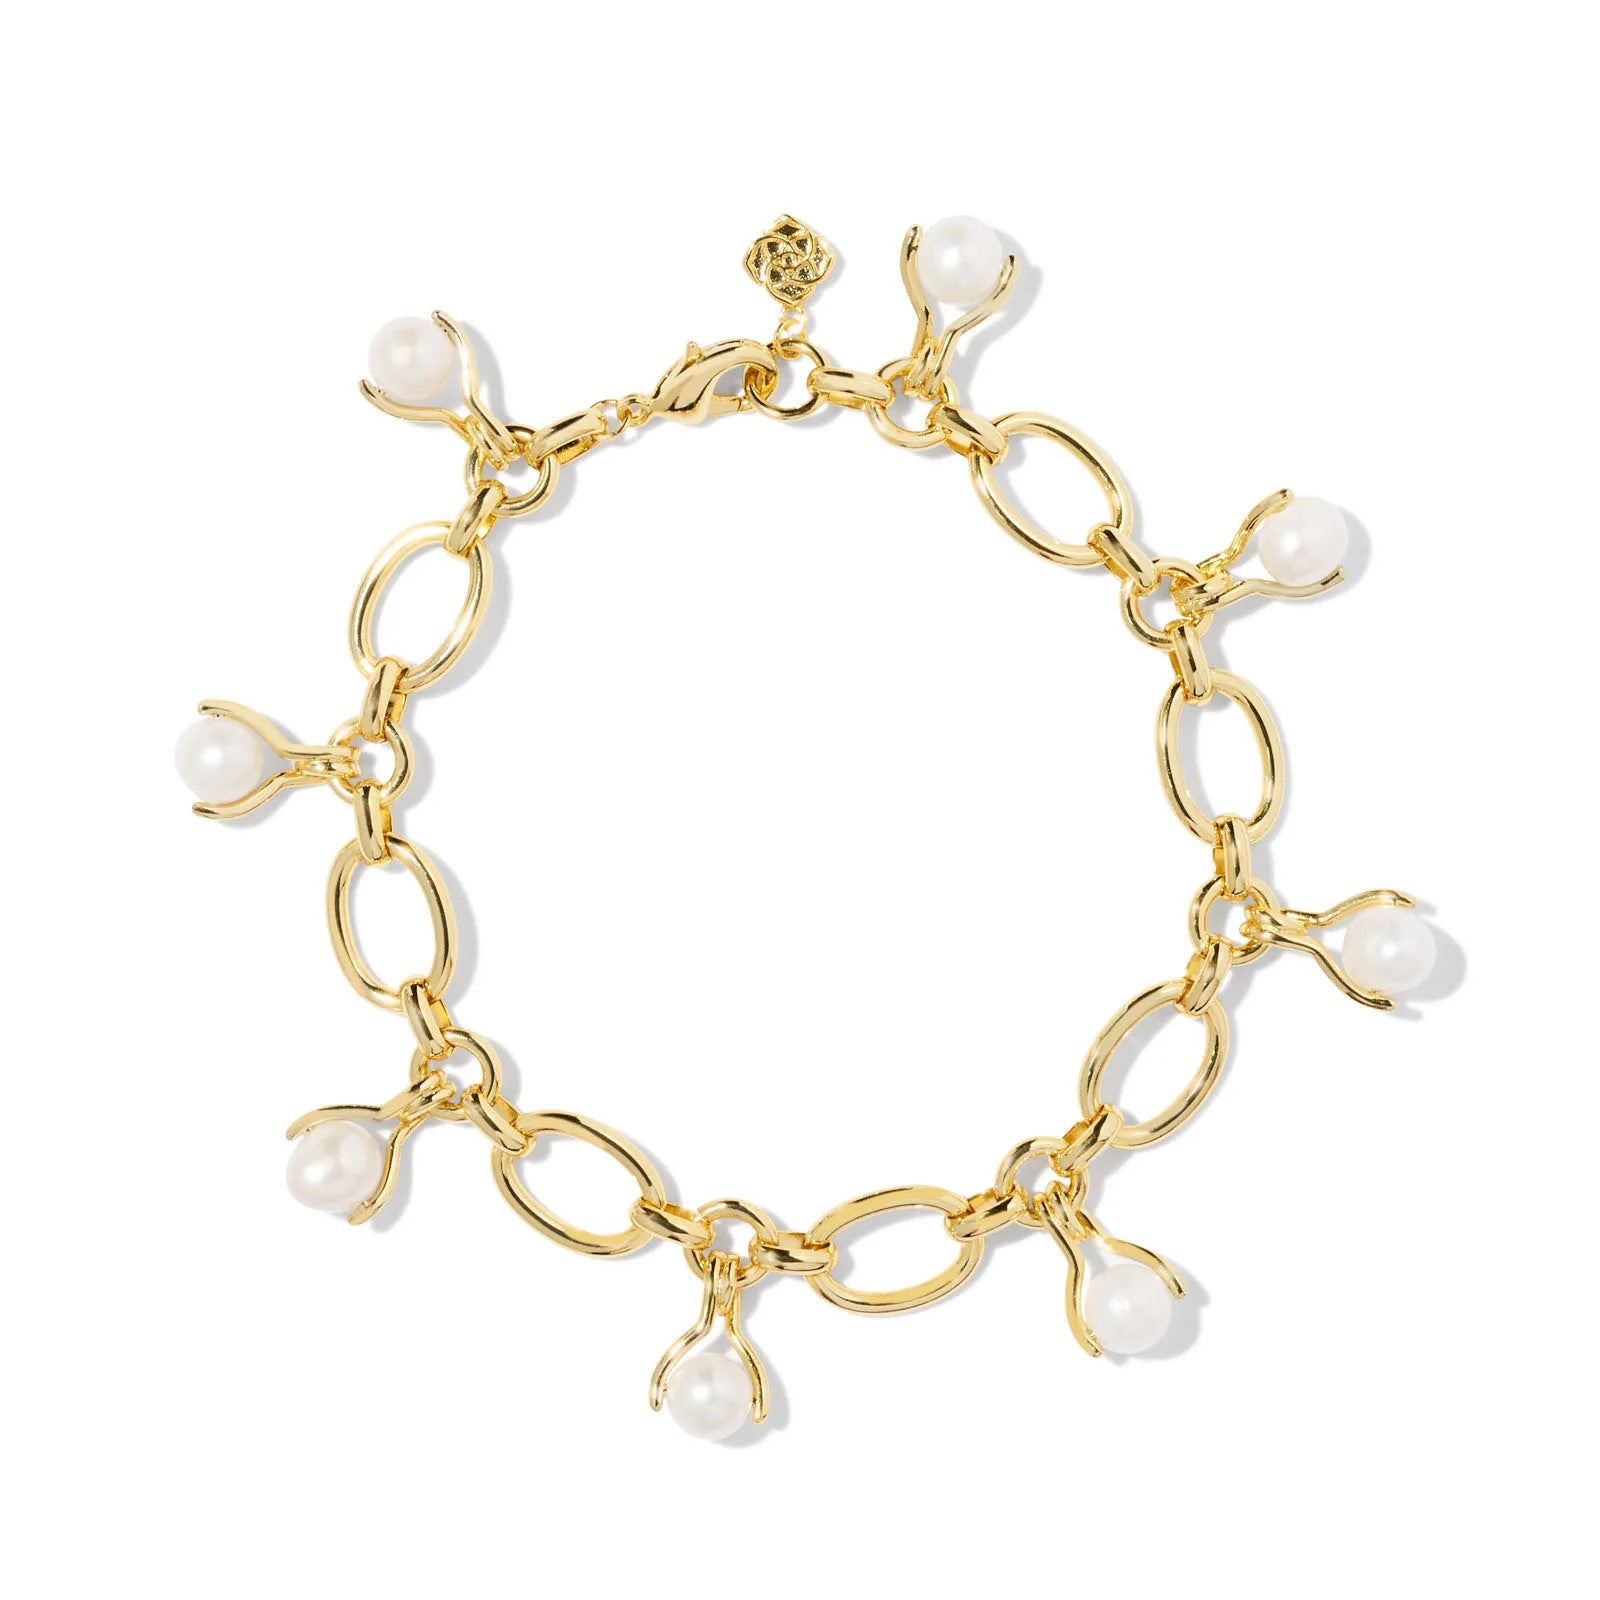 Kendra Scott | Ashton Gold Pearl Chain Bracelet in White Pearl - Giddy Up Glamour Boutique